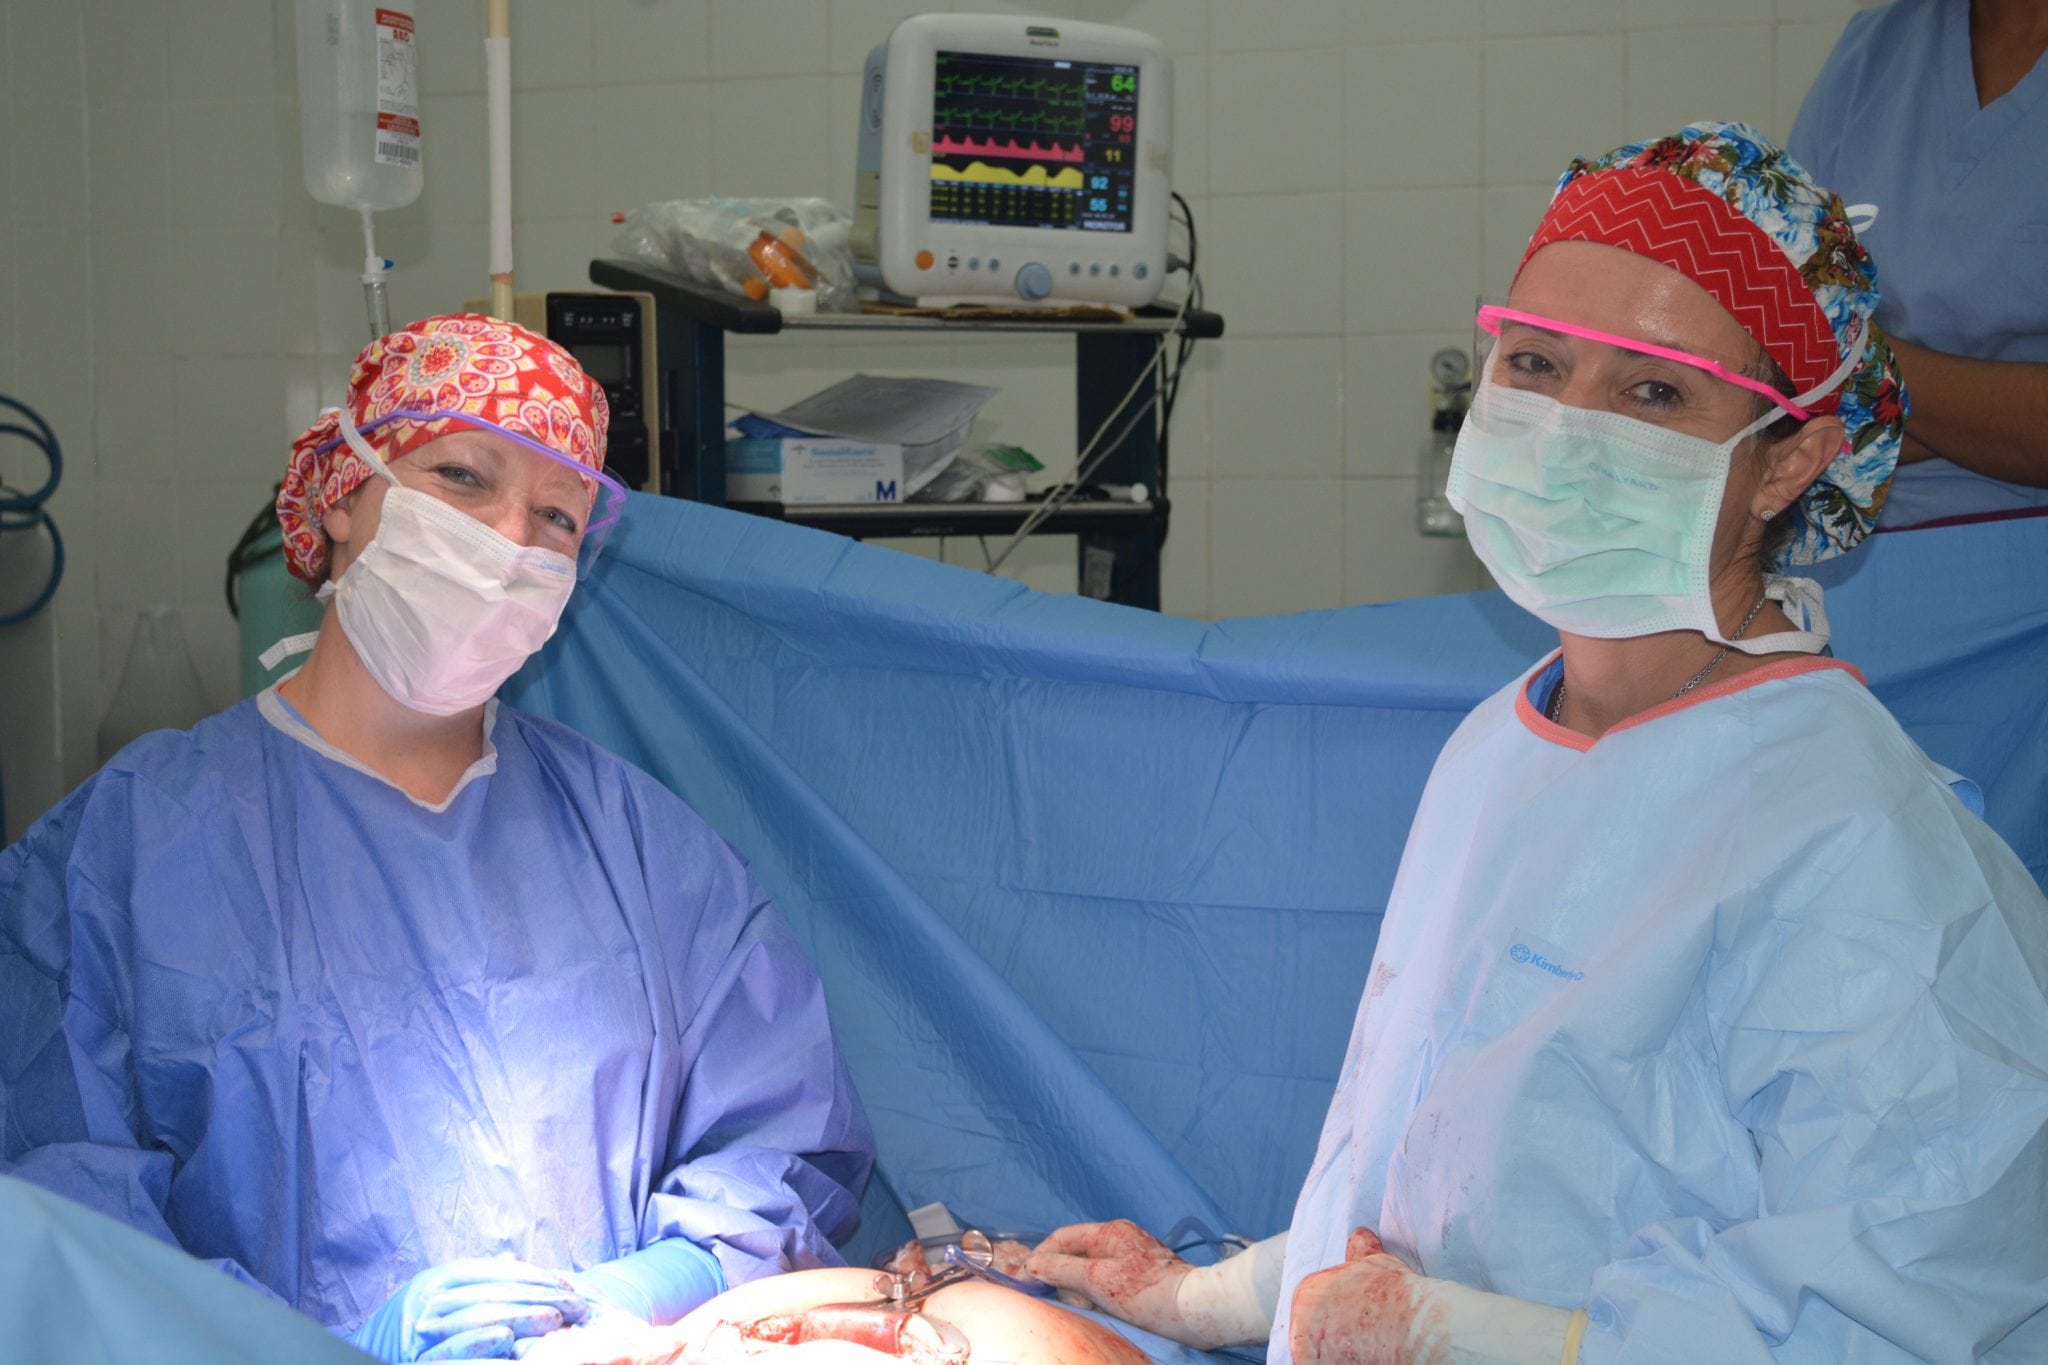 A woman wearing a surgical mask in photos.